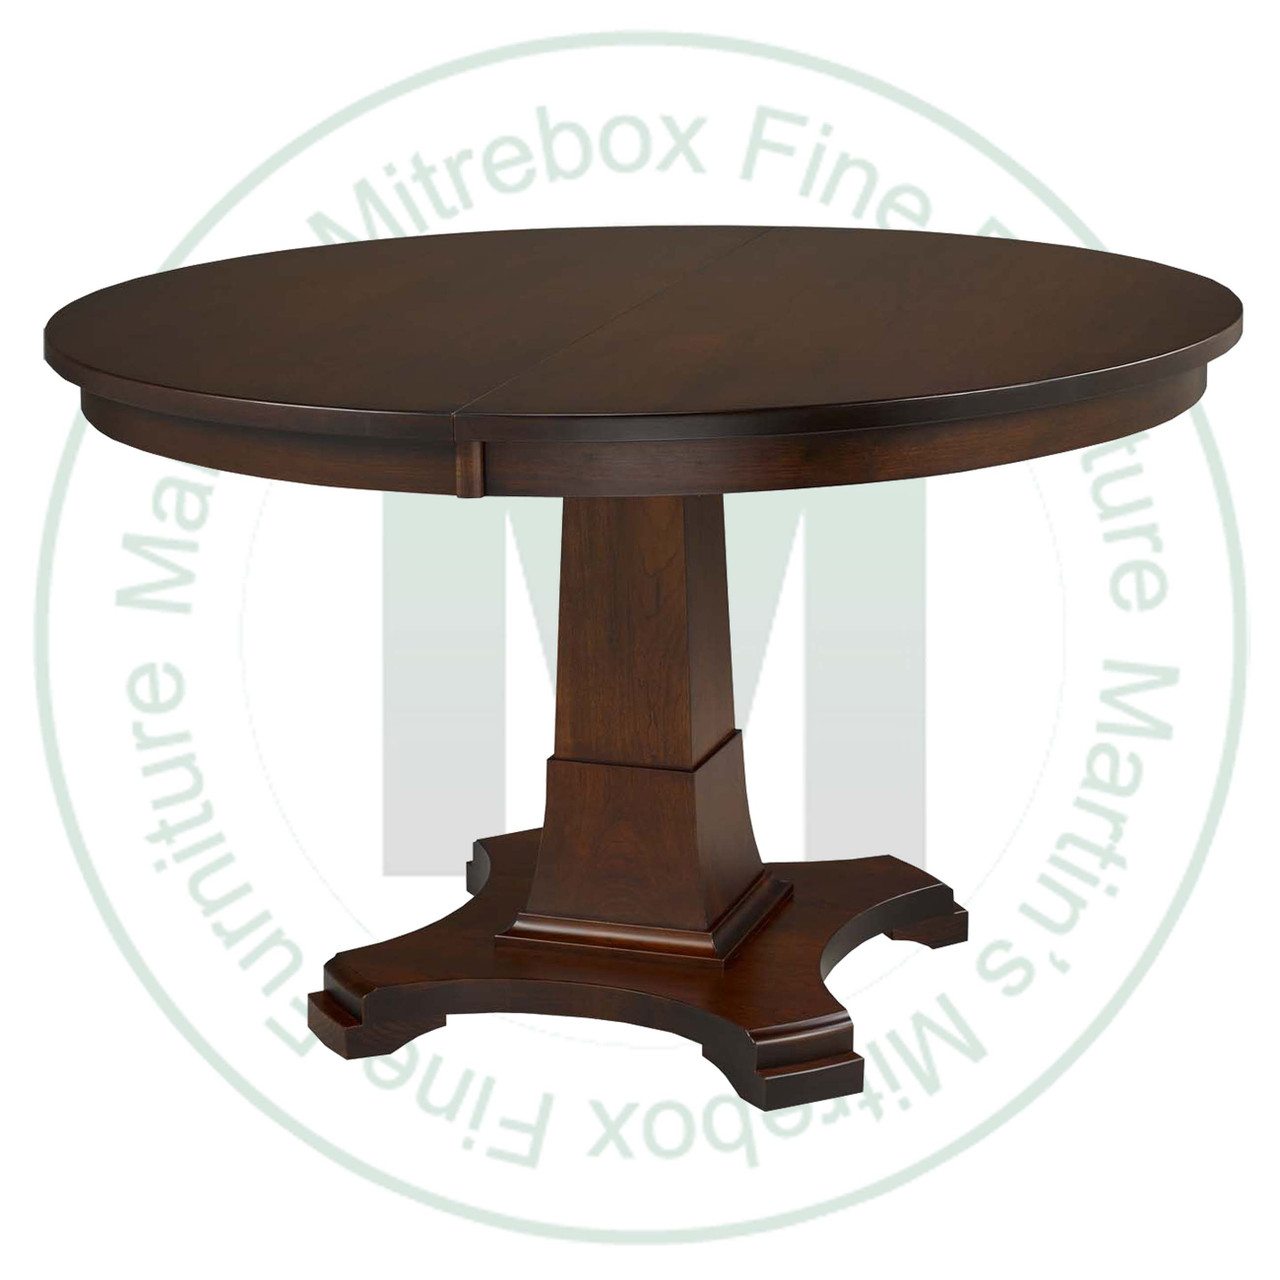 Maple Abbey Single Pedestal Table 54''D x 54''W x 30''H Round Solid Table. Table Has 1.25'' Thick Top